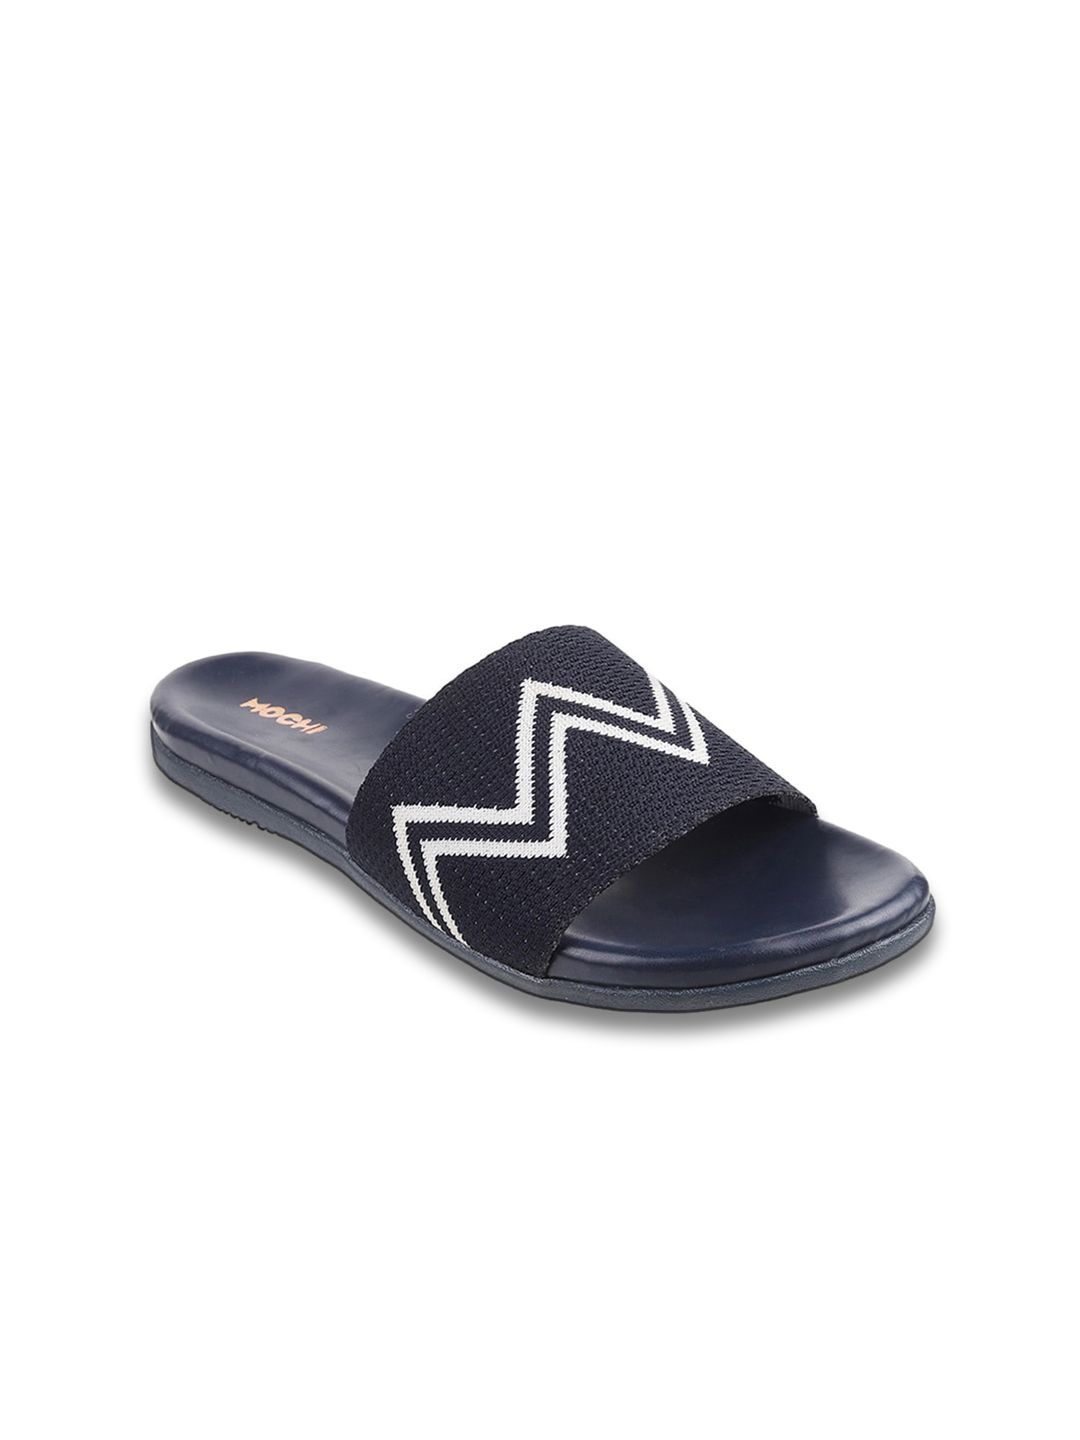 Mochi Women Blue & White Printed Rubber Sliders Price in India